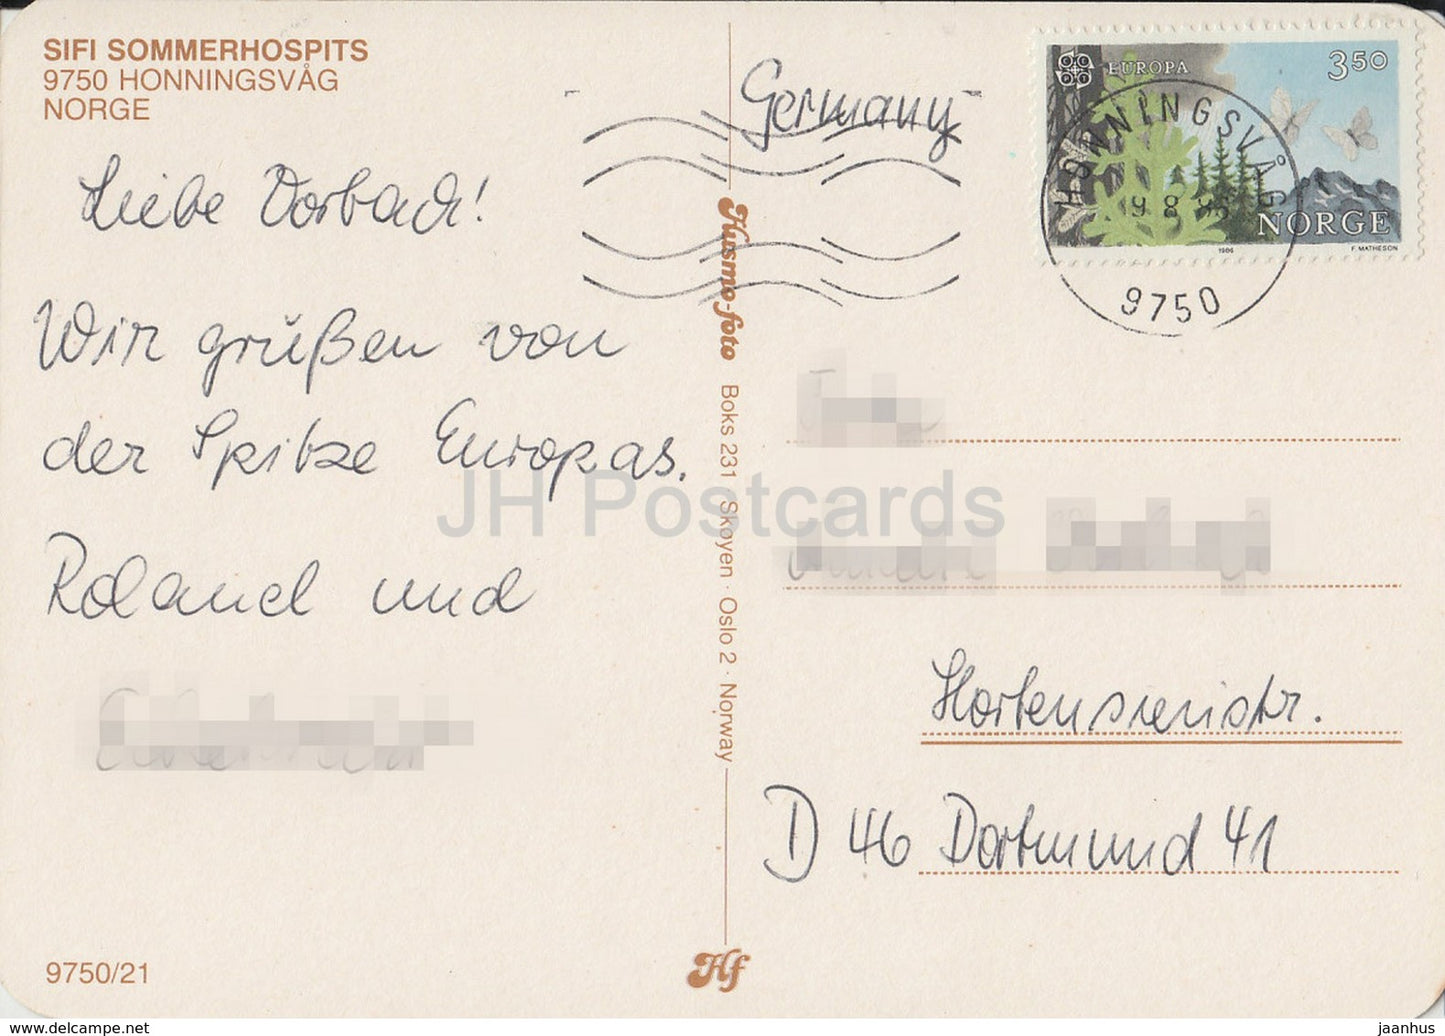 Sifi Sommerhospits - Honningsvag - summer hospice - boat - 1986 - Norway - used